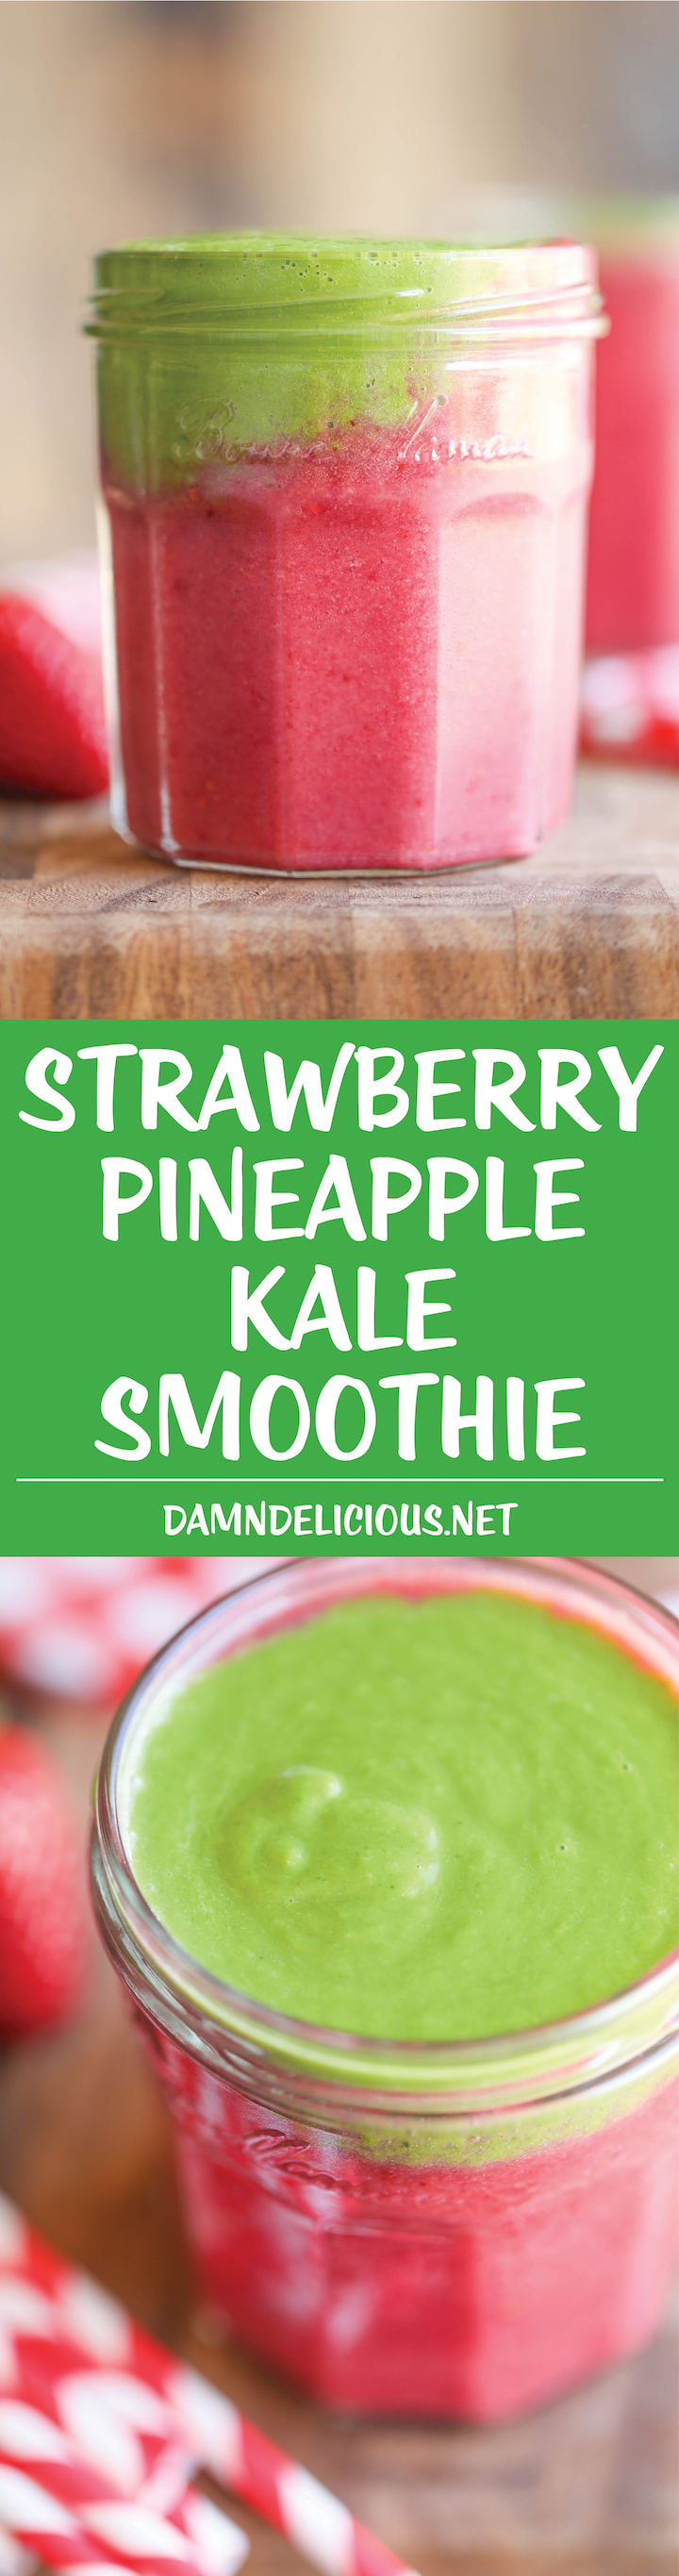 Strawberry Pineapple Kale Smoothie - A power-packed, nutritious smoothie that doesn't even taste healthy! An absolute must for your mornings!